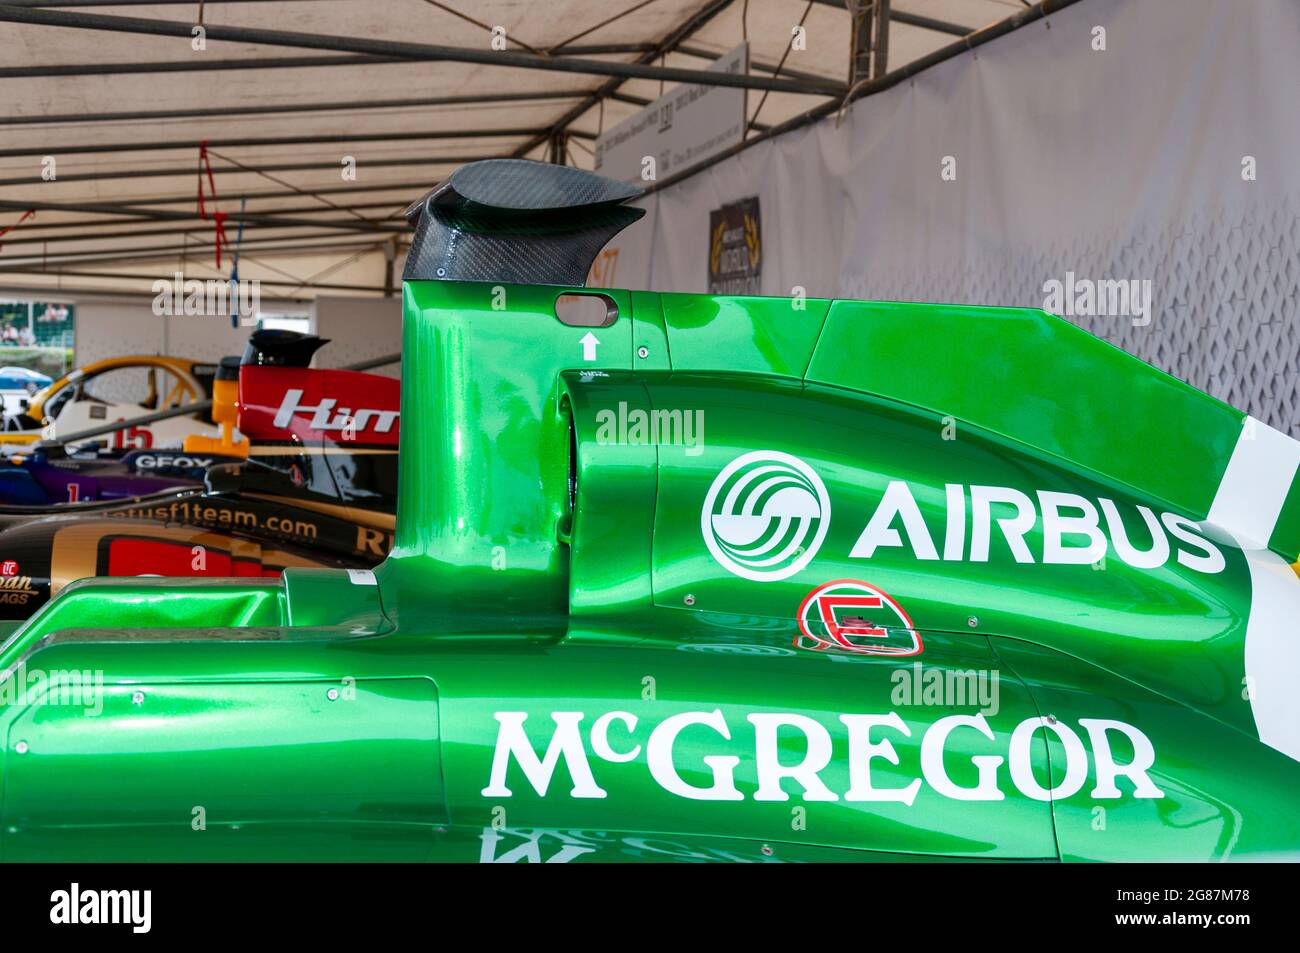 Air intake of a Caterham CT03 Formula 1, Grand Prix racing car at the Goodwood Festival of Speed 2013 with sponsors Airbus, McGregor on green bodywork Stock Photo